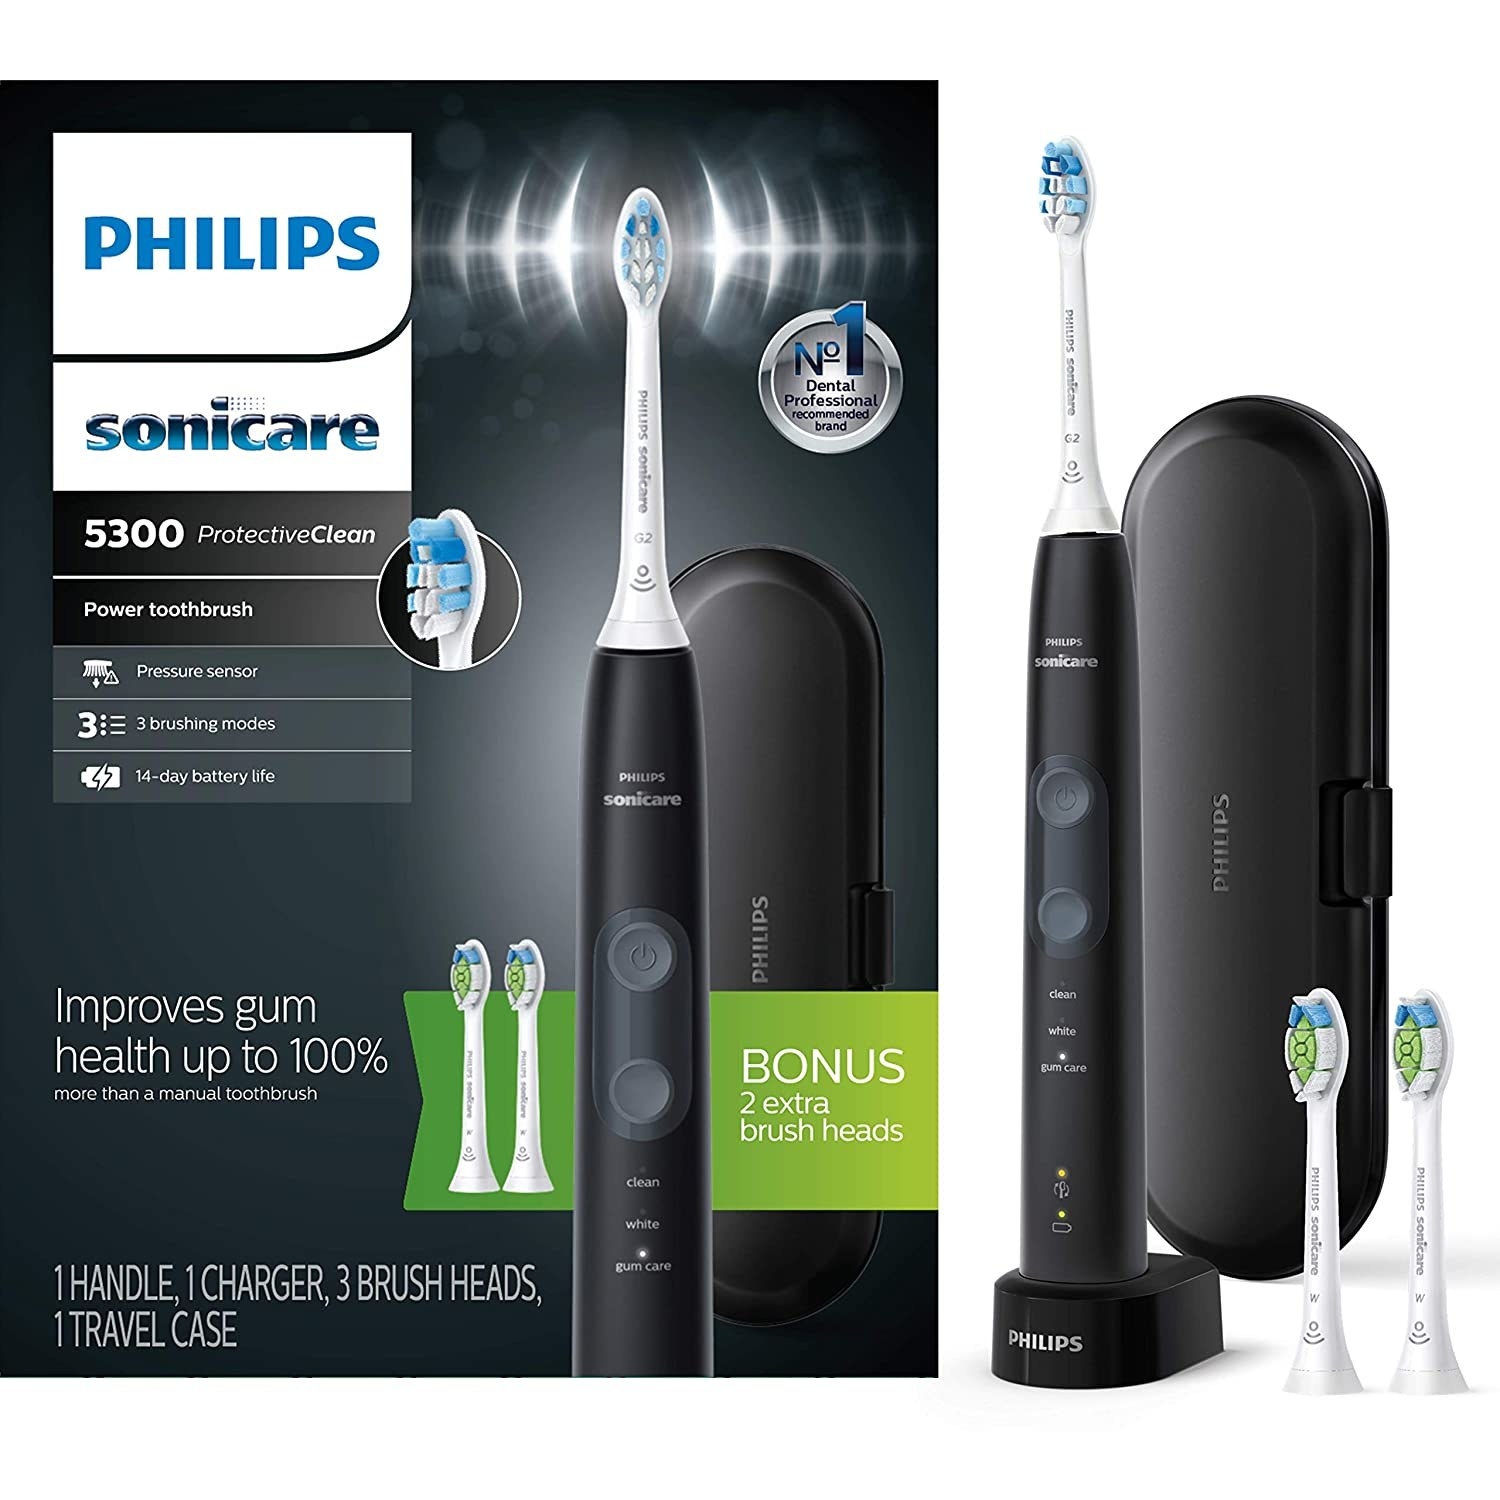 Philips sonicare electric toothbrush packaging